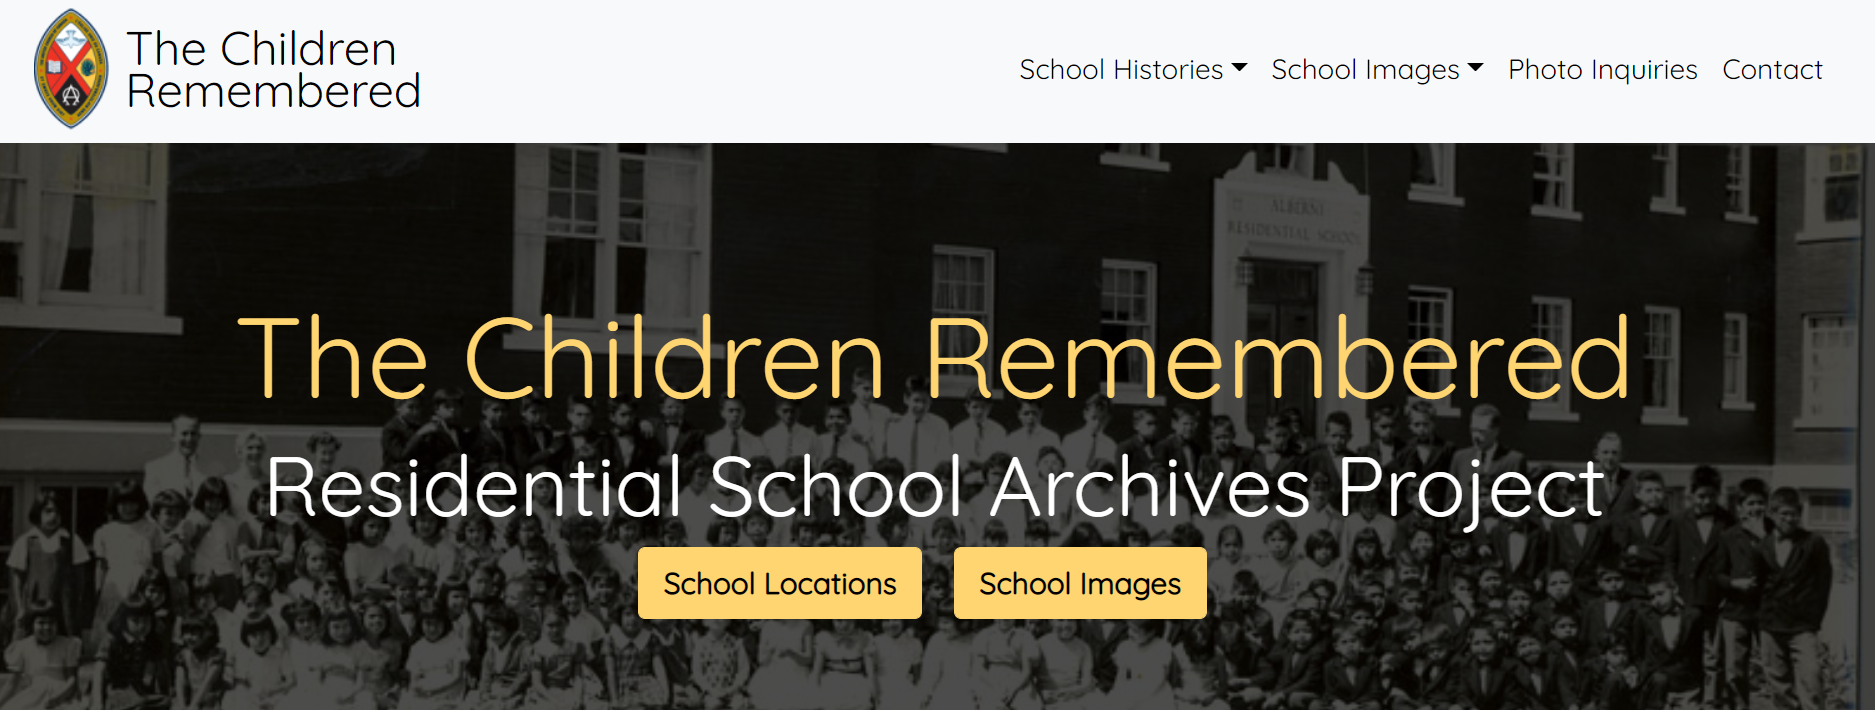 Screen shot of The Children Remembered website